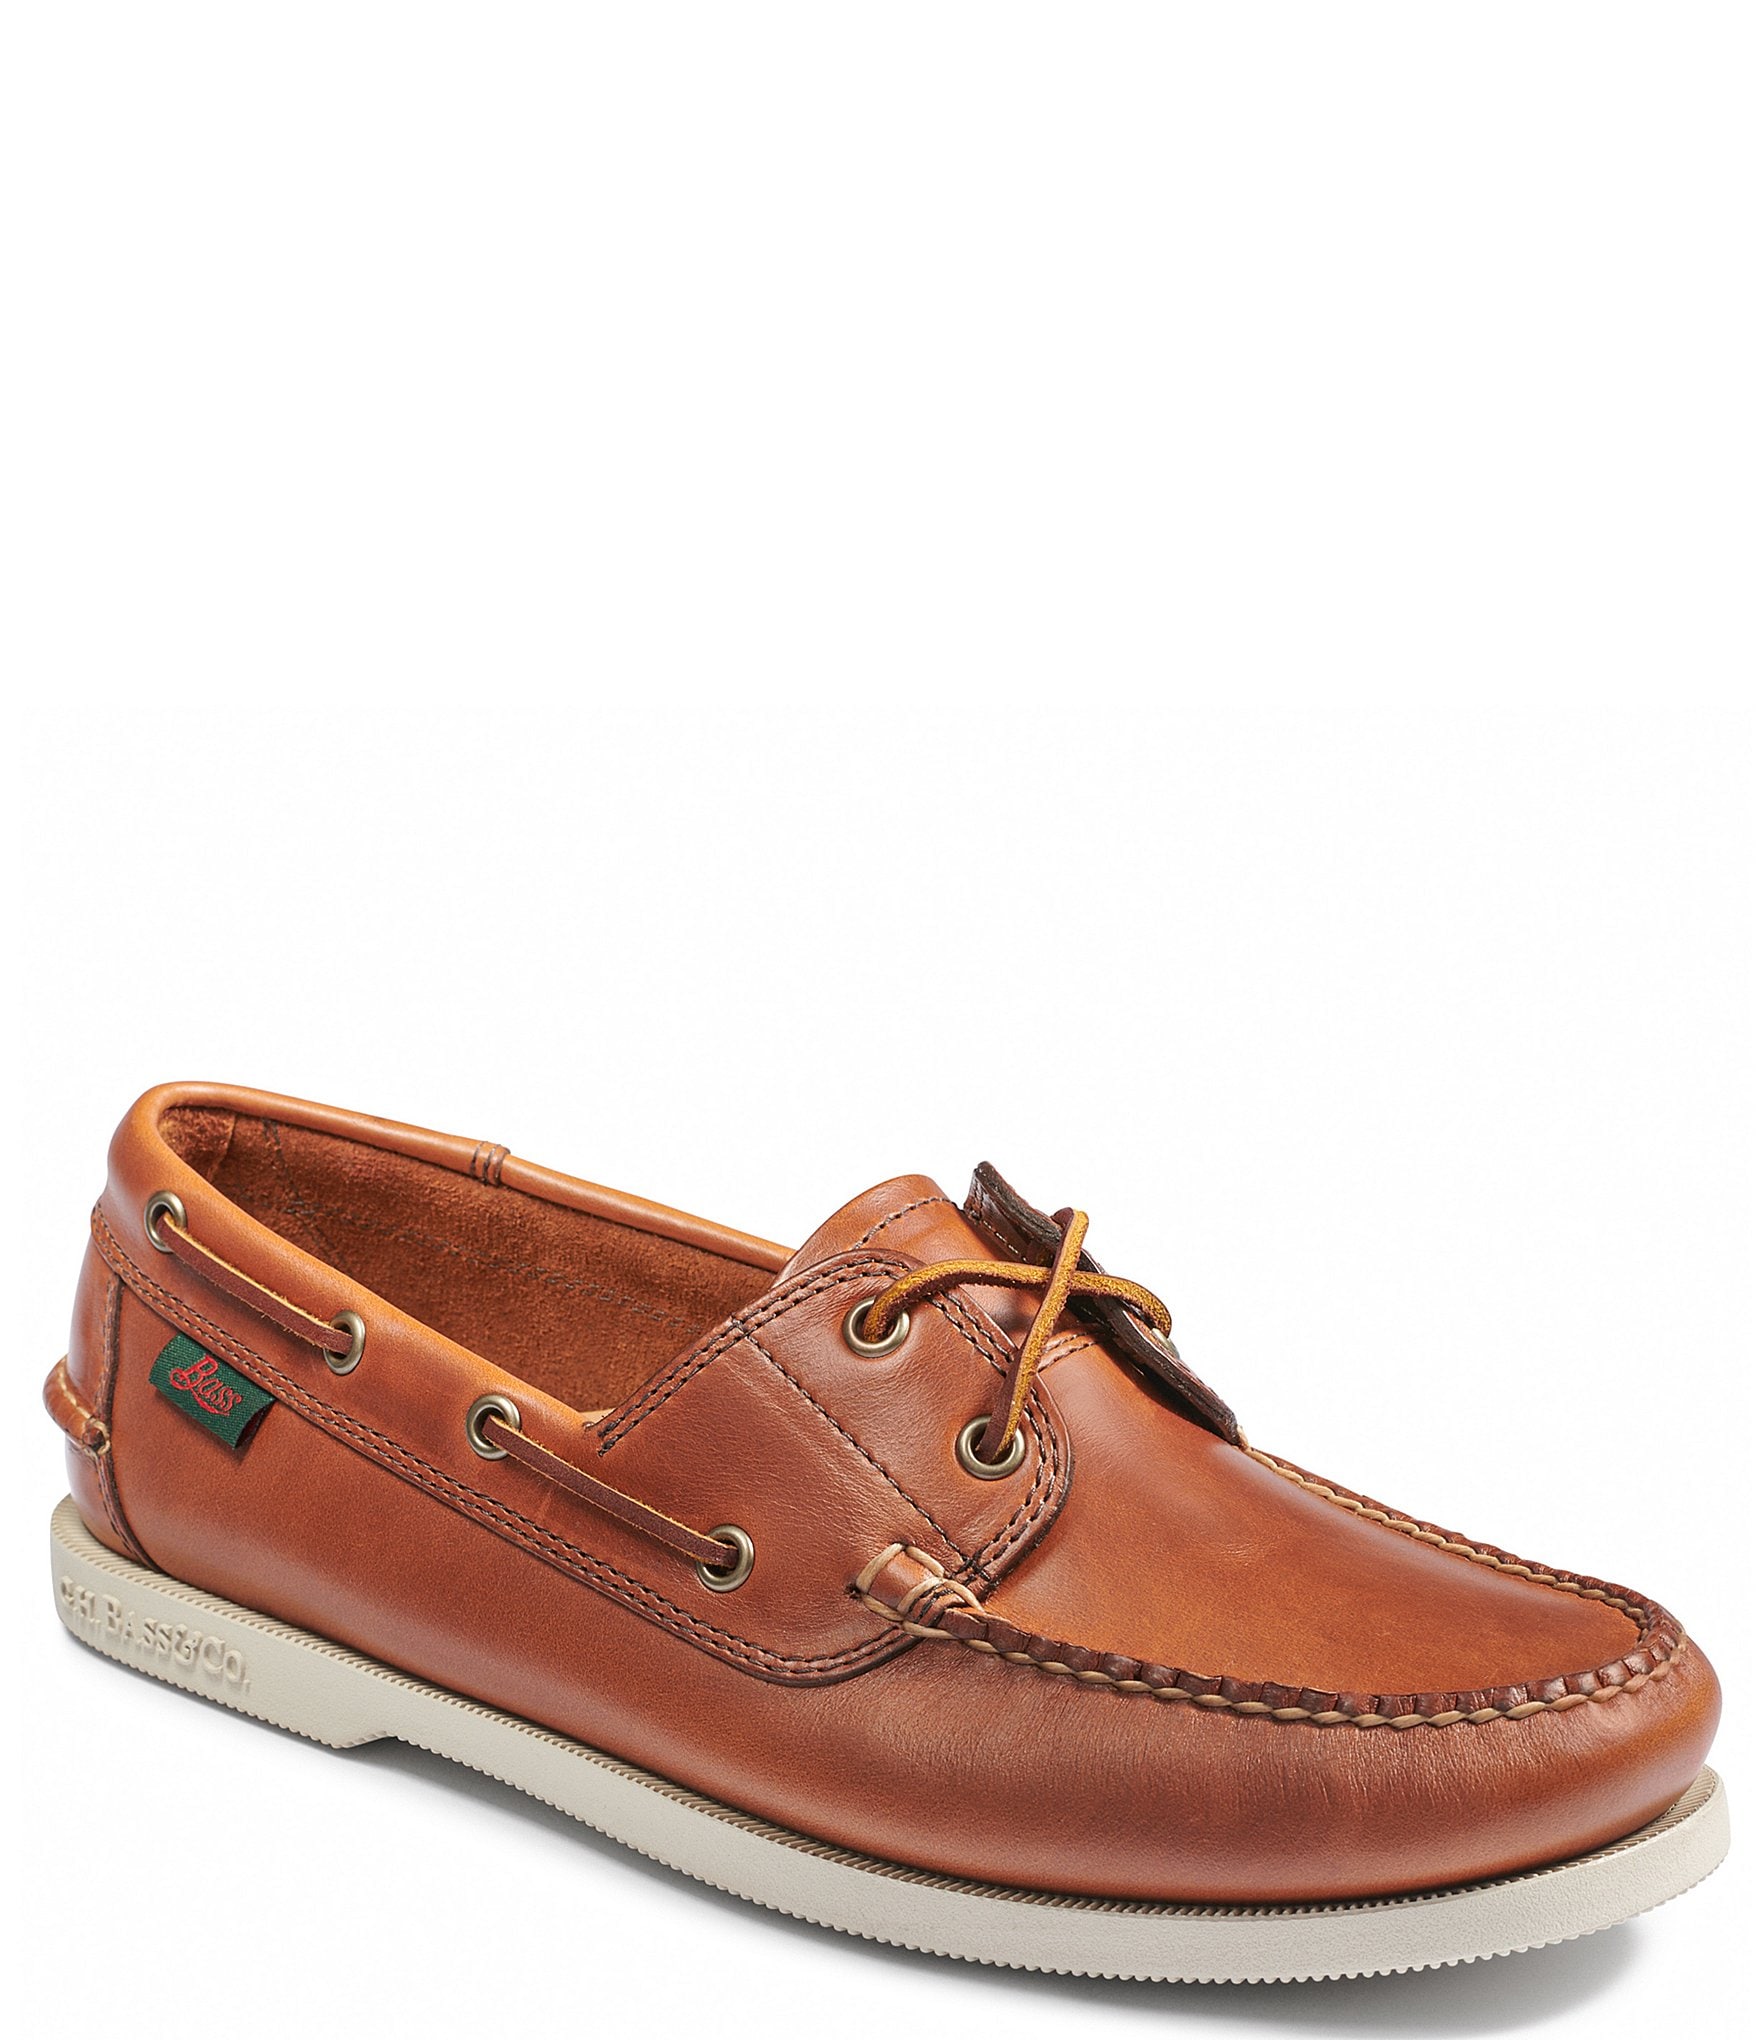 Chatham Deck II G2 Leather Boat Shoes, Chestnut at John Lewis & Partners